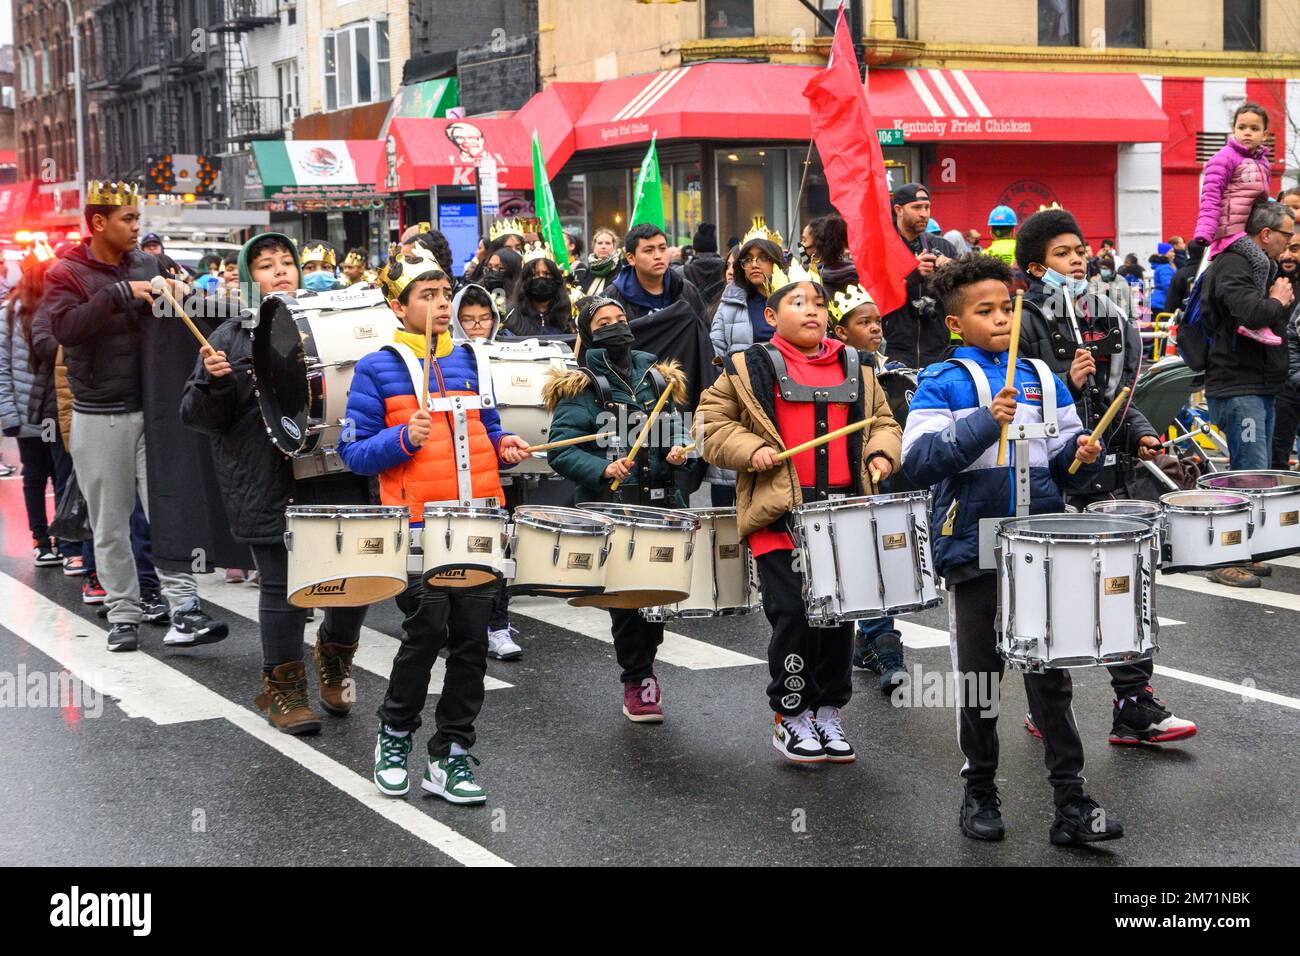 New York, USA. 6th Jan, 2023. A music band of schoolchildren march through the streets in East Harlem during the 46th annual Three Kings Day Parade organized by El Museo del Barrio. The traditional Spanish celebration was held in person for the first time since the start of the coronavirus (COVID-19) pandemic. The theme for this year was: 'Entre Familia: Mental Health & Wellness of our Communities' focusing on the importance of mental health and wellness. Credit: Enrique Shore/Alamy Live News Stock Photo